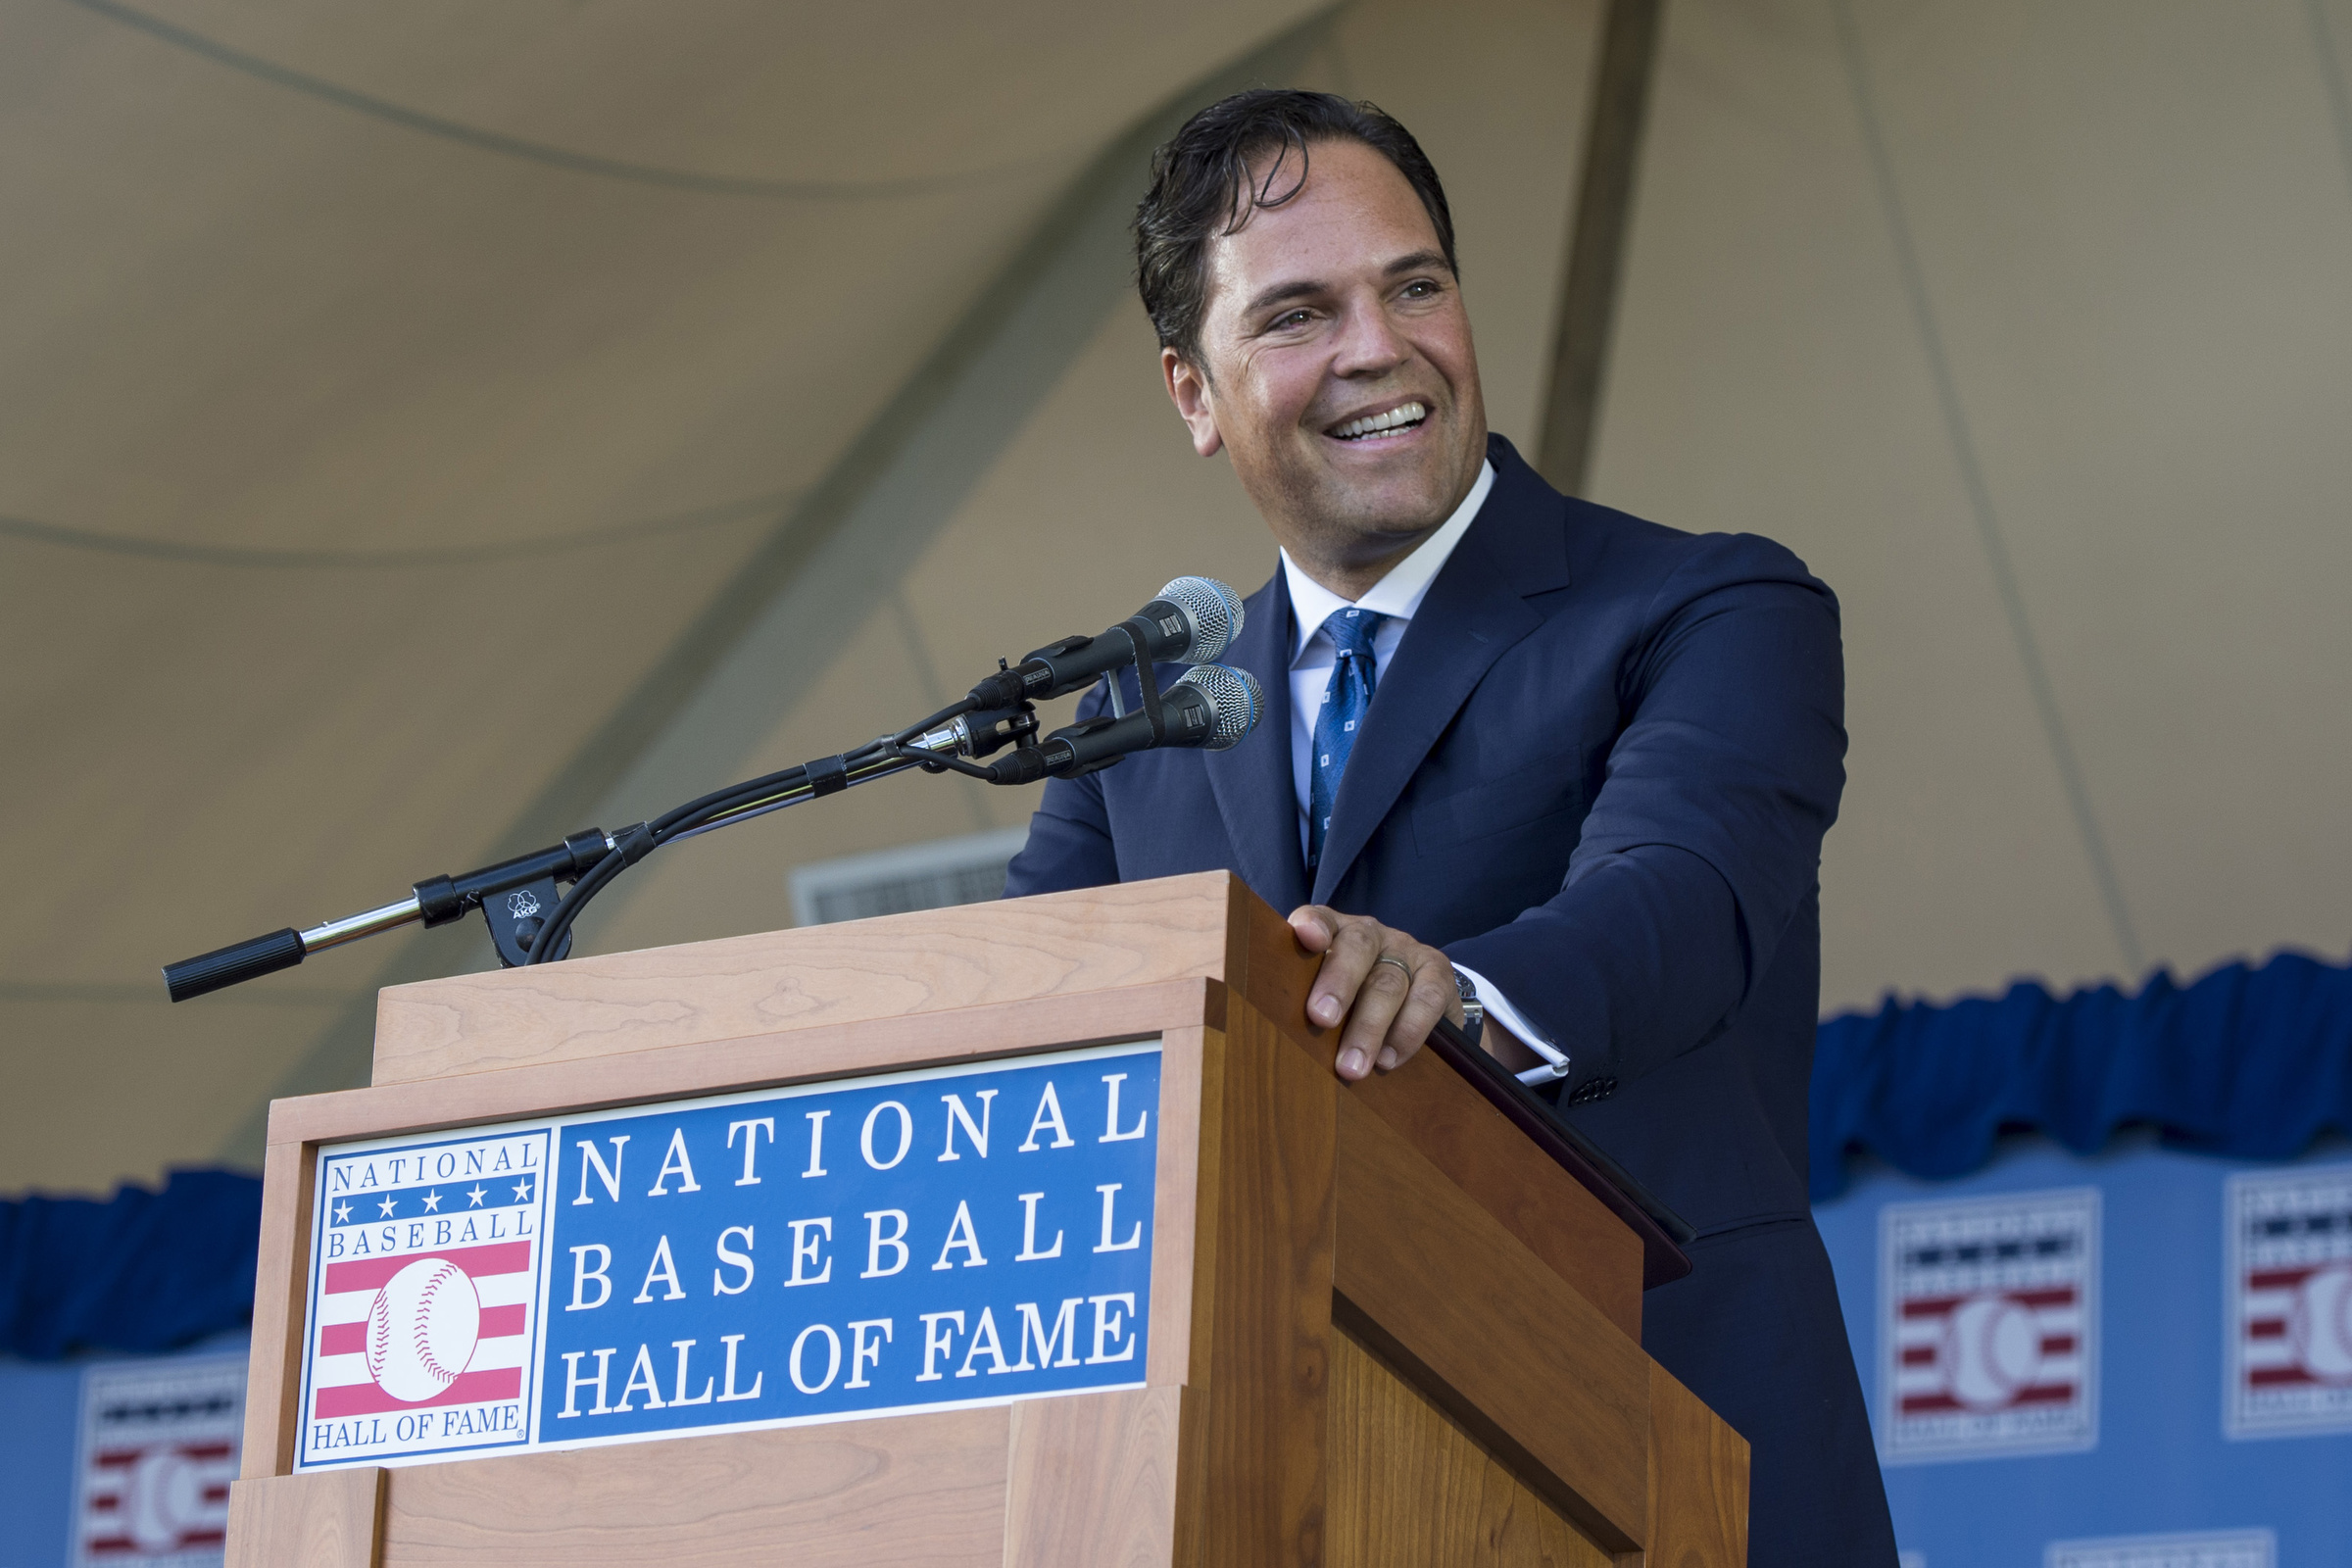 Mike Piazza makes his acceptance speech during the National Baseball Hall of Fame induction ceremony July 24 in Cooperstown, N.Y. The superstar catcher gave credit to his Catholic faith for his success in his life and career. (CNS photo/Gregory Fisher, USA Today Sports via Reuters) See PIAZZA-INDUCTION July 26, 2016.